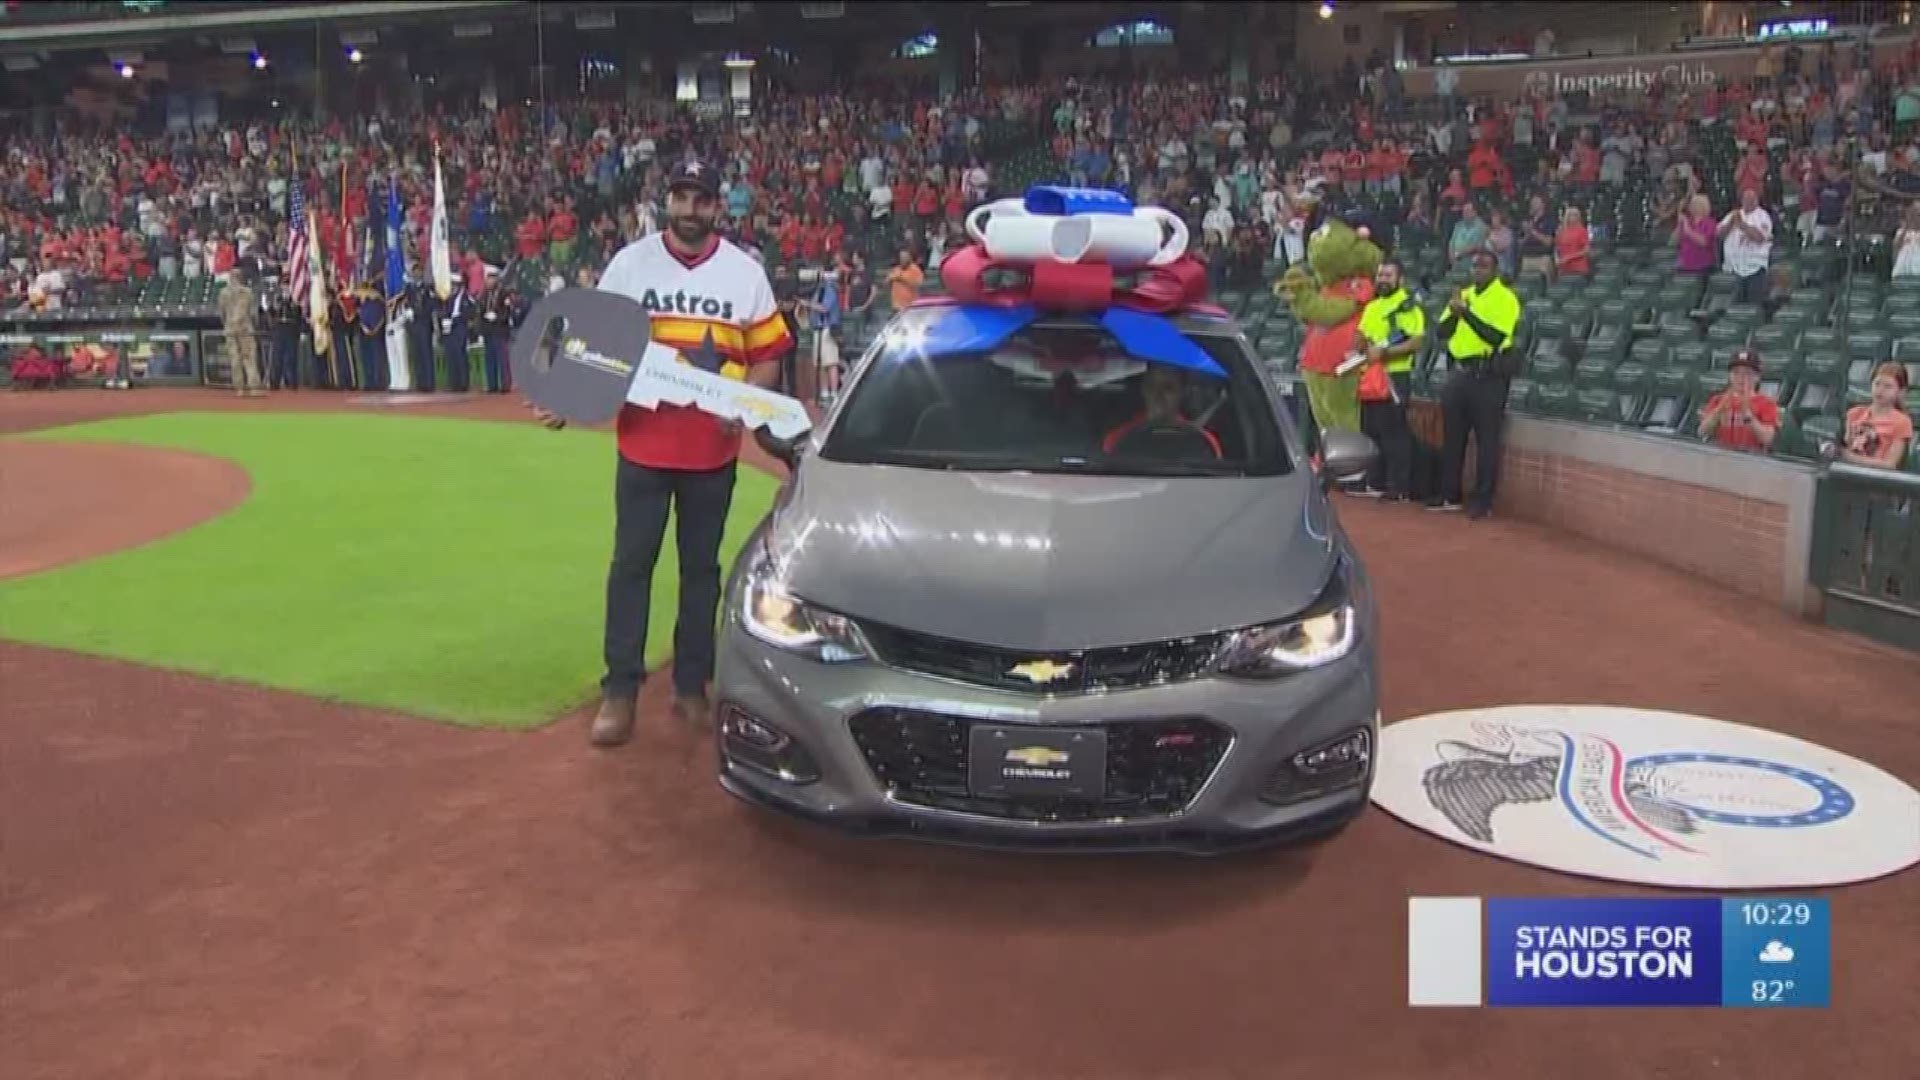 A Marine veteran was surprised with a new car Friday night before the Astros-Rangers game at Minute Maid Park.